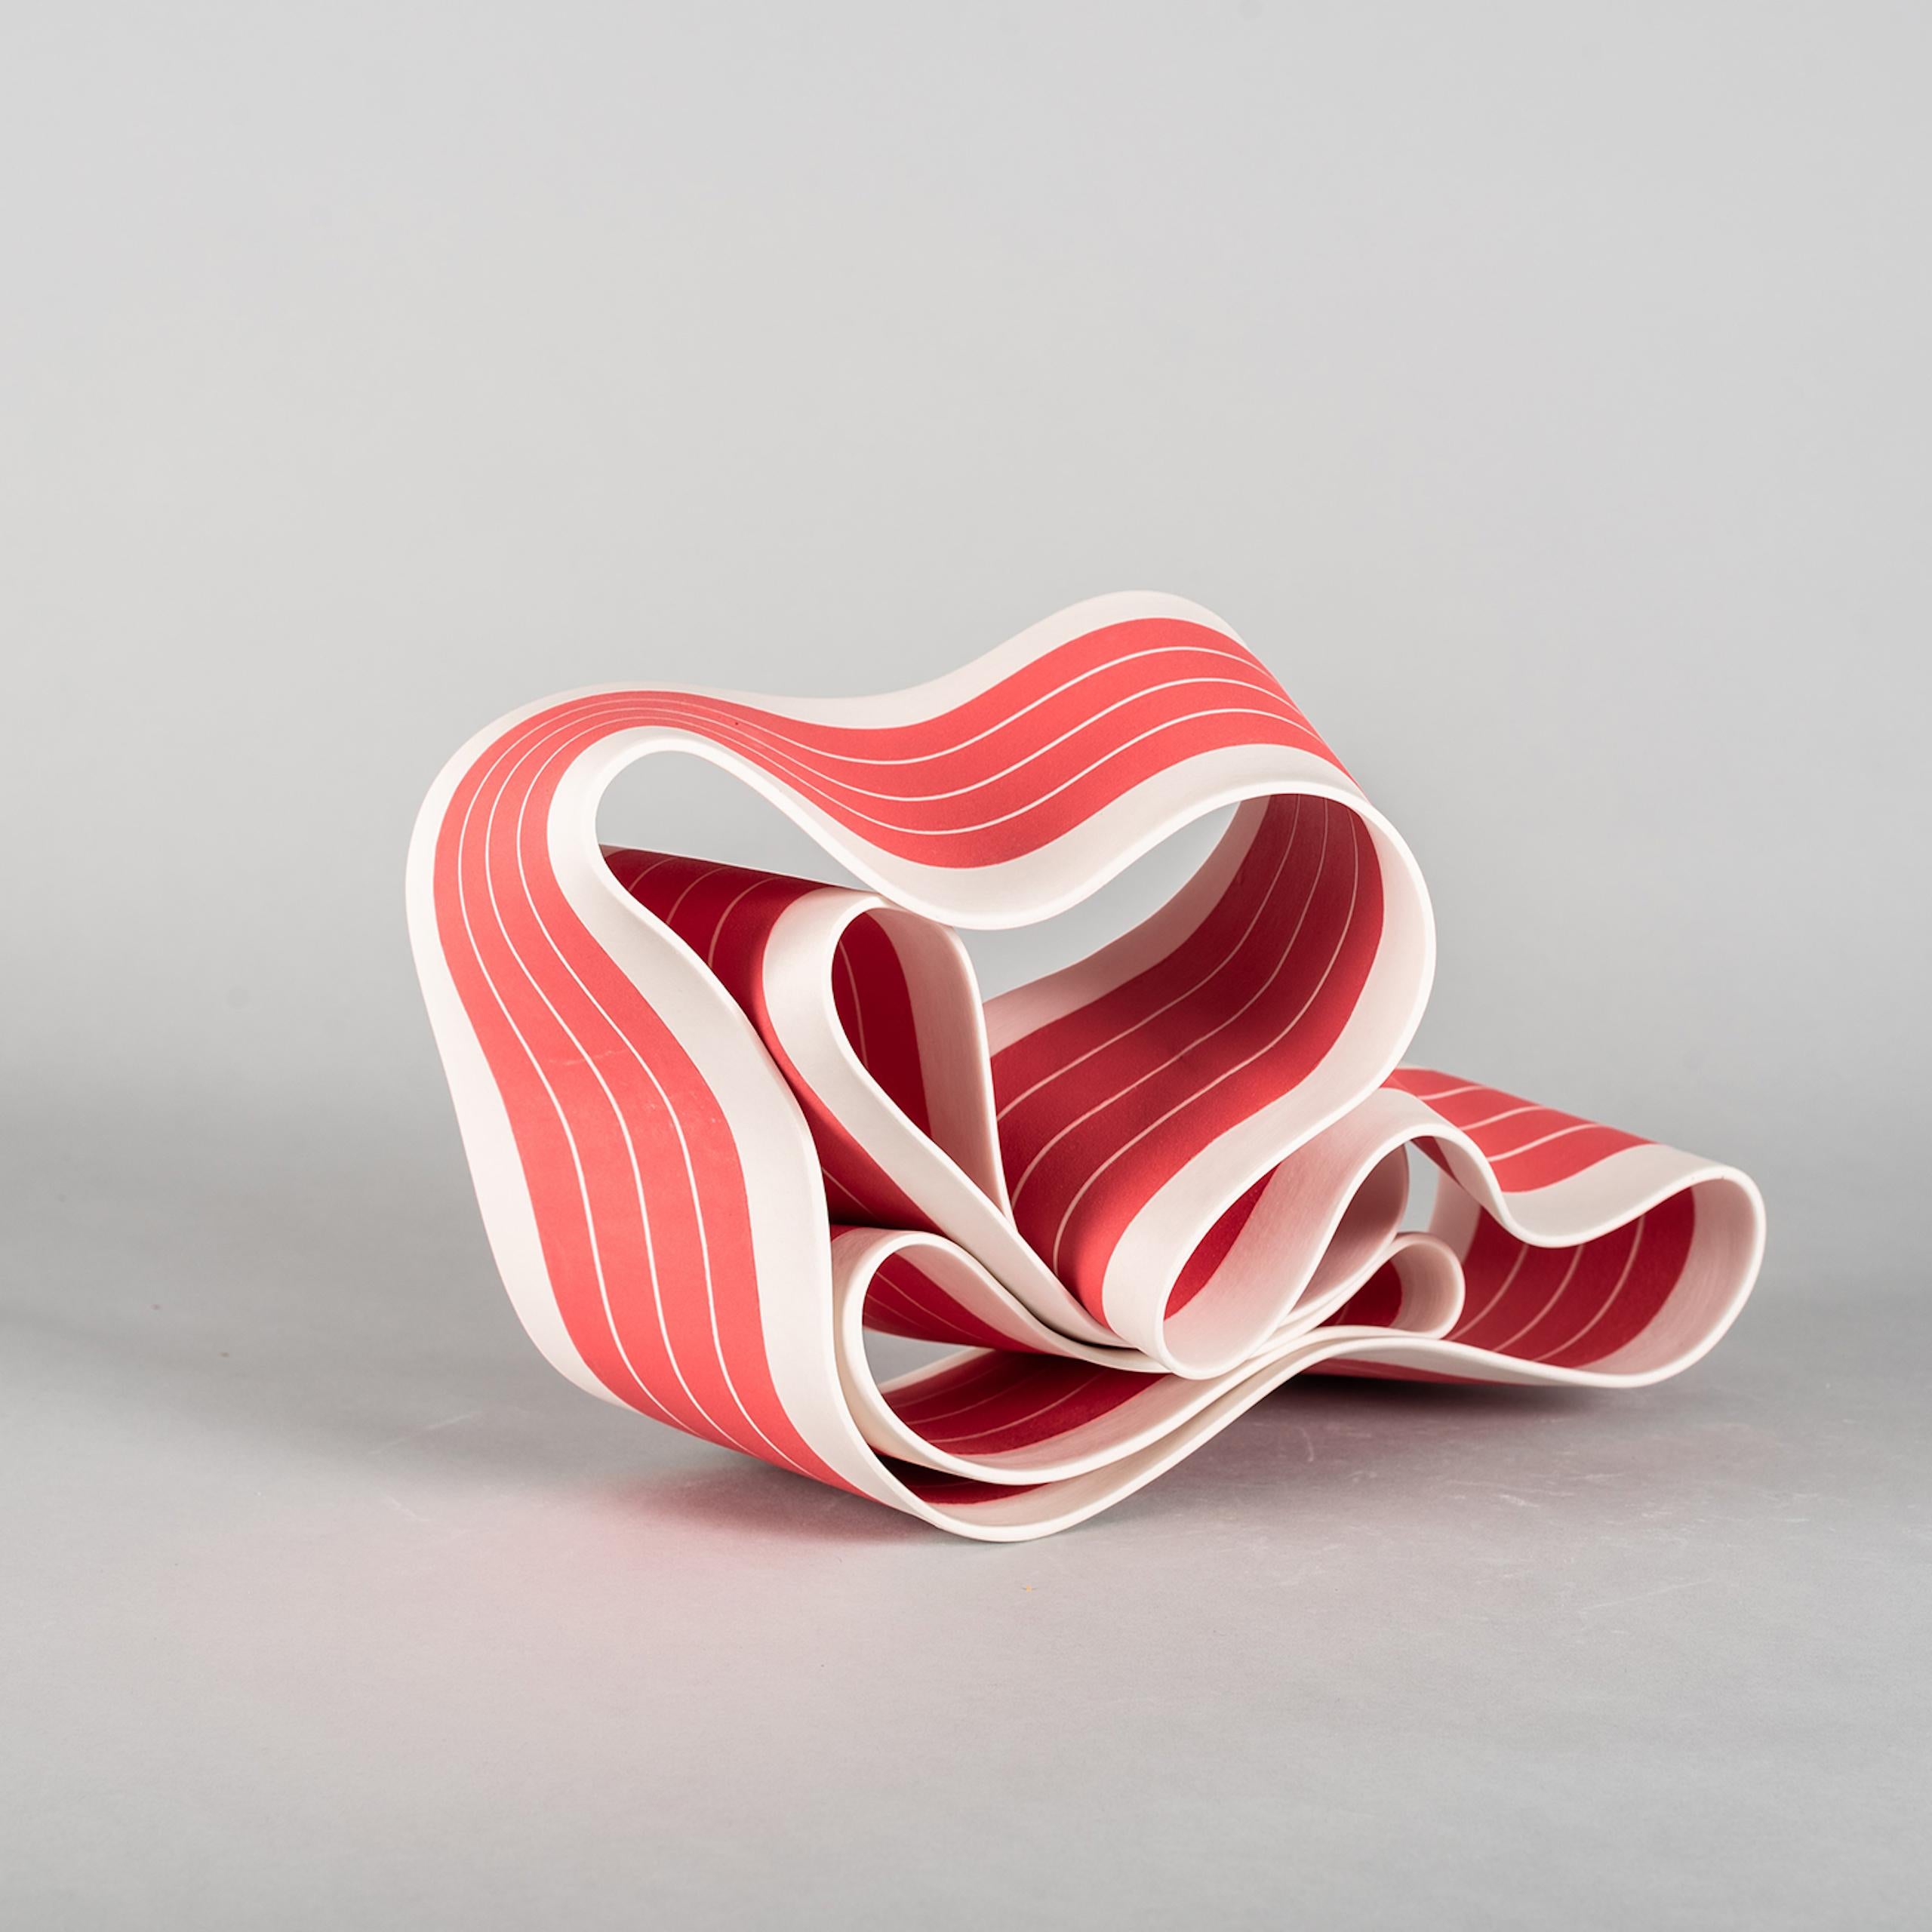 Folding in Motion 3 by Simcha Even-Chen - porcelain sculpture, red For Sale 5